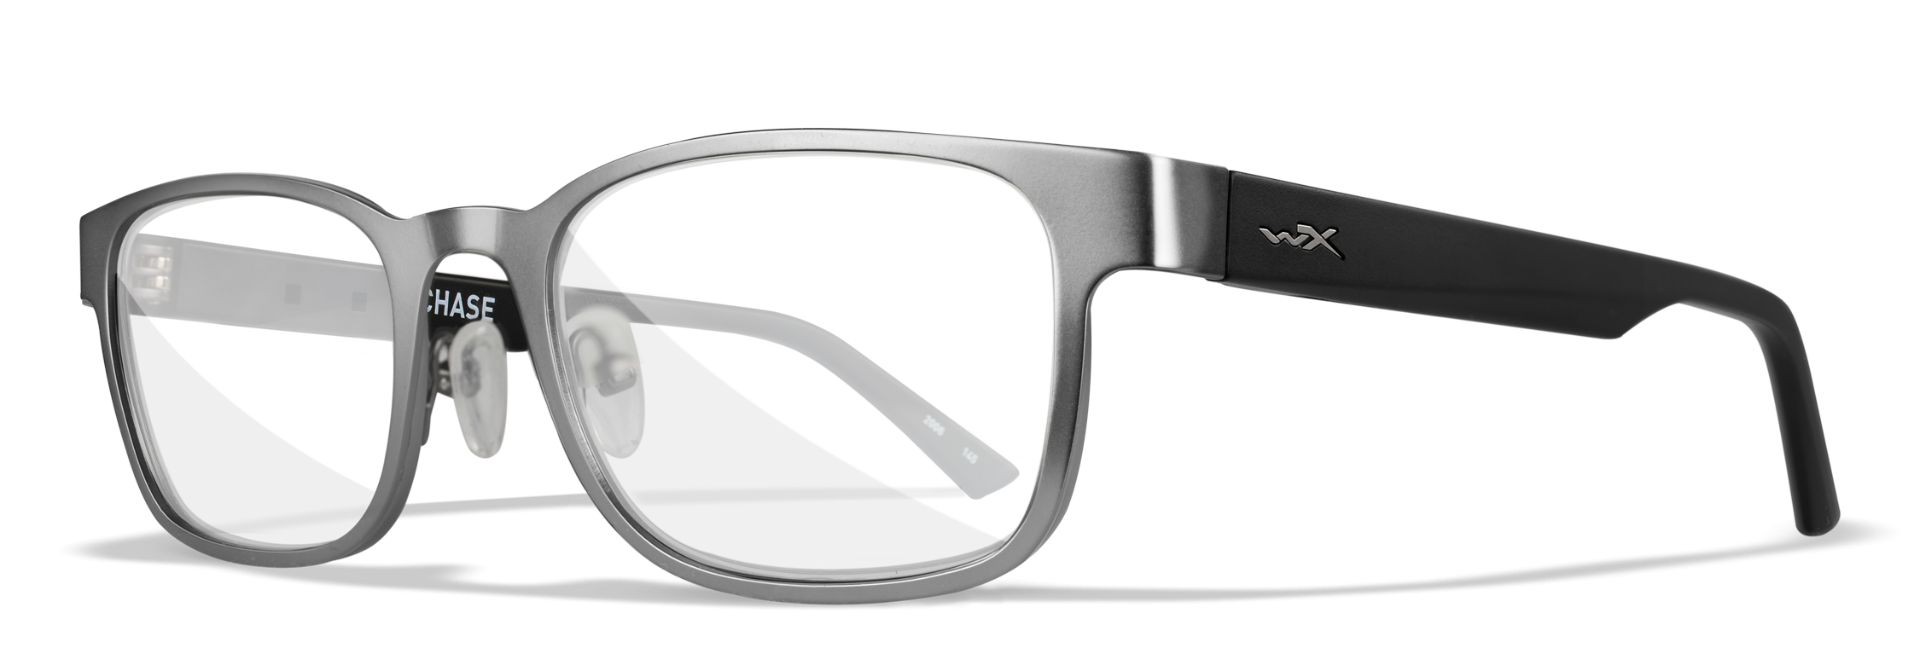 Wiley-X Chase Safety Glasses